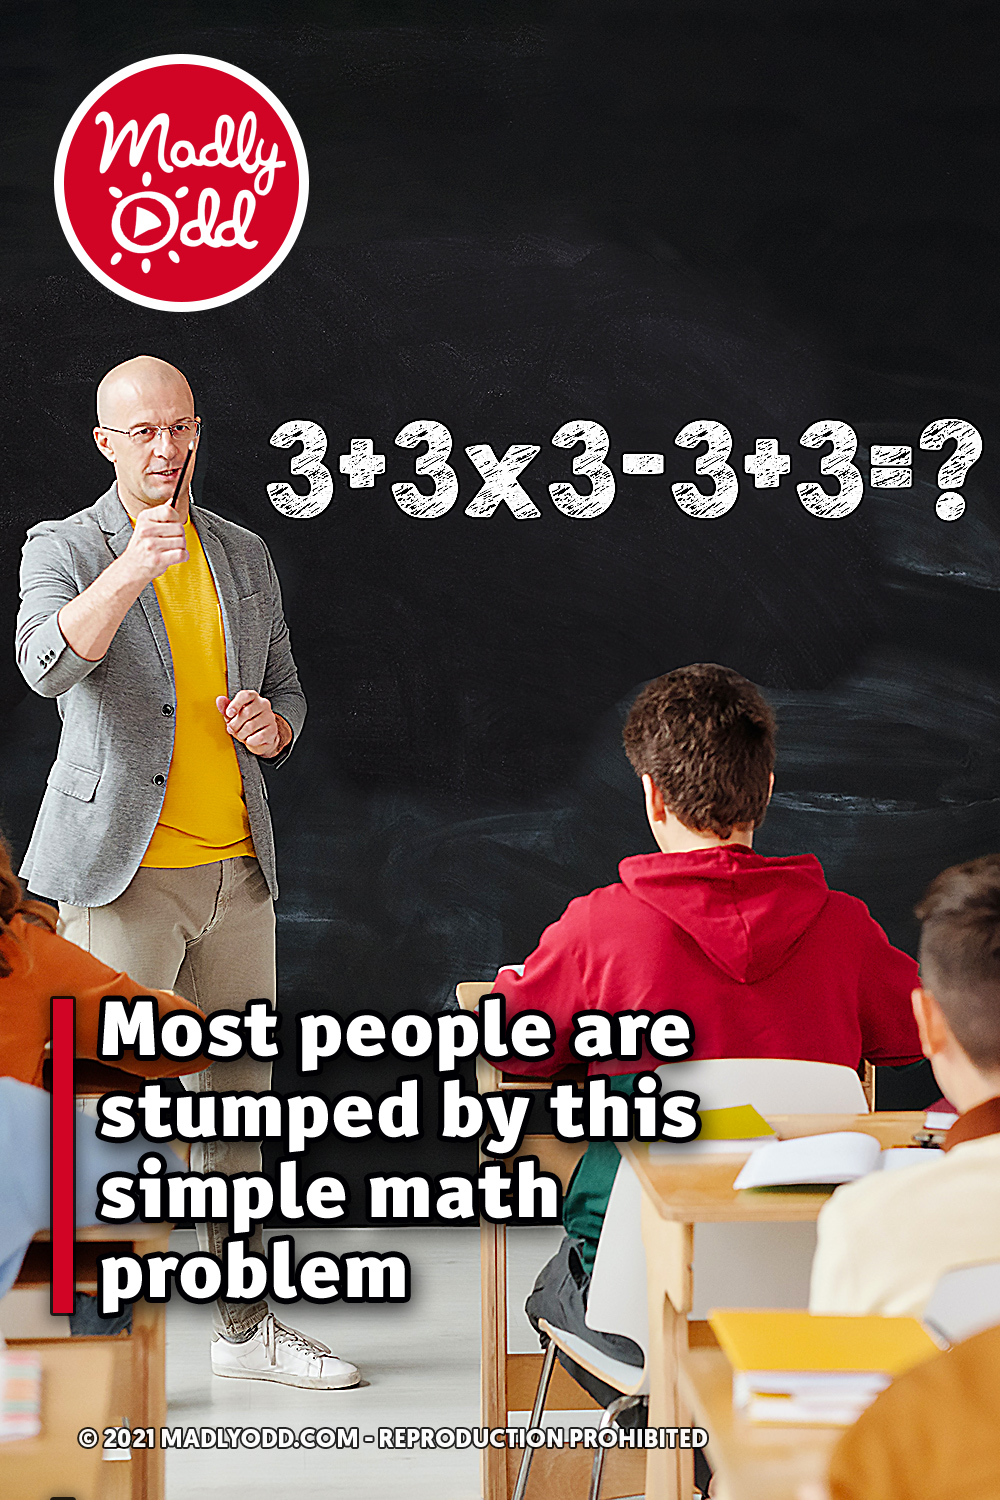 Most people are stumped by this simple math problem